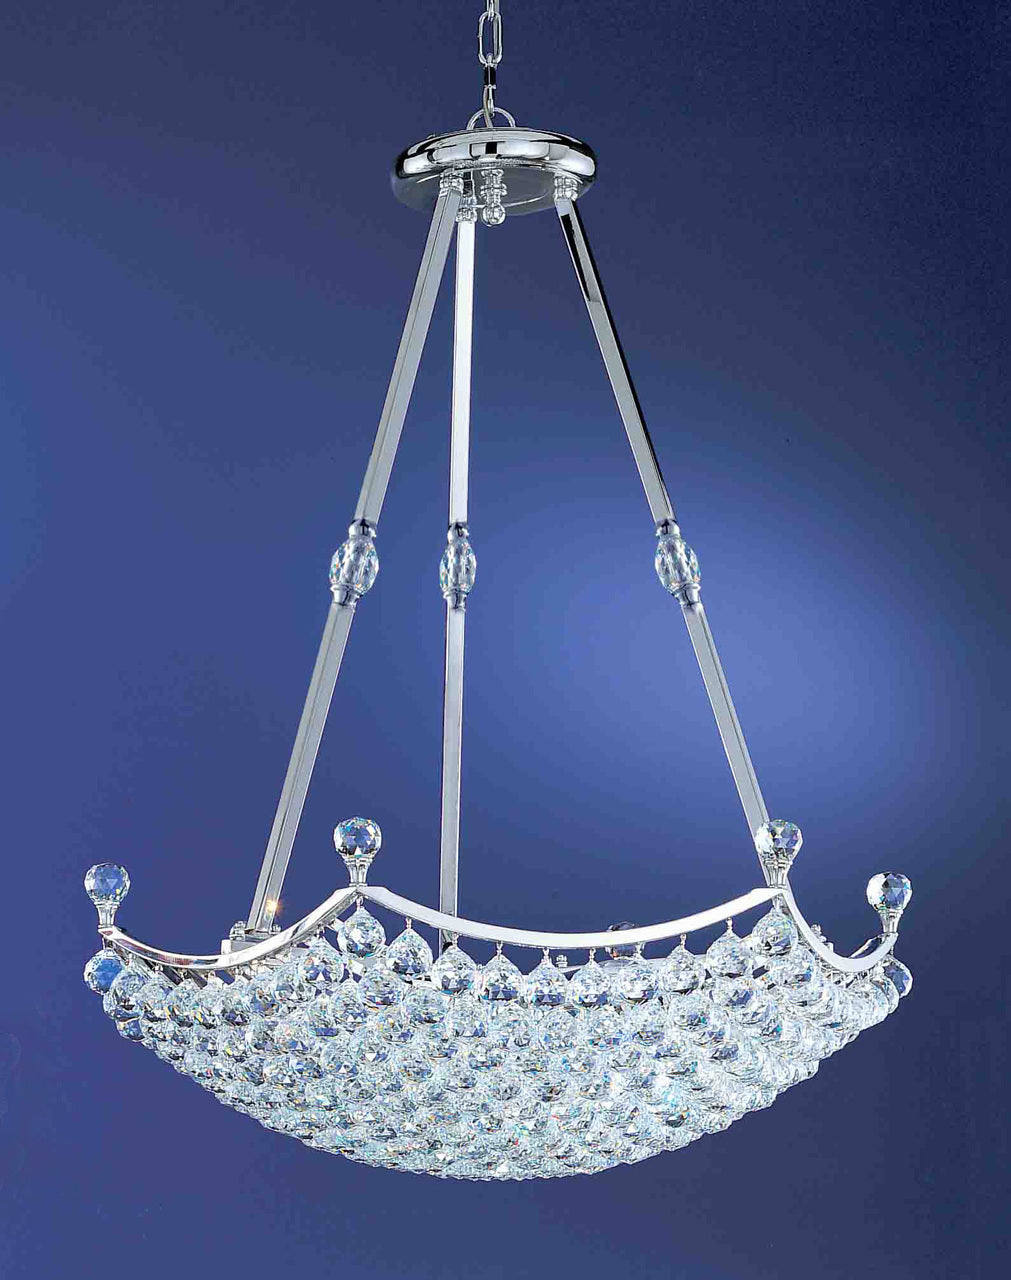 Classic Lighting 69777 CH SC Solitaire Crystal Pendant in Chrome